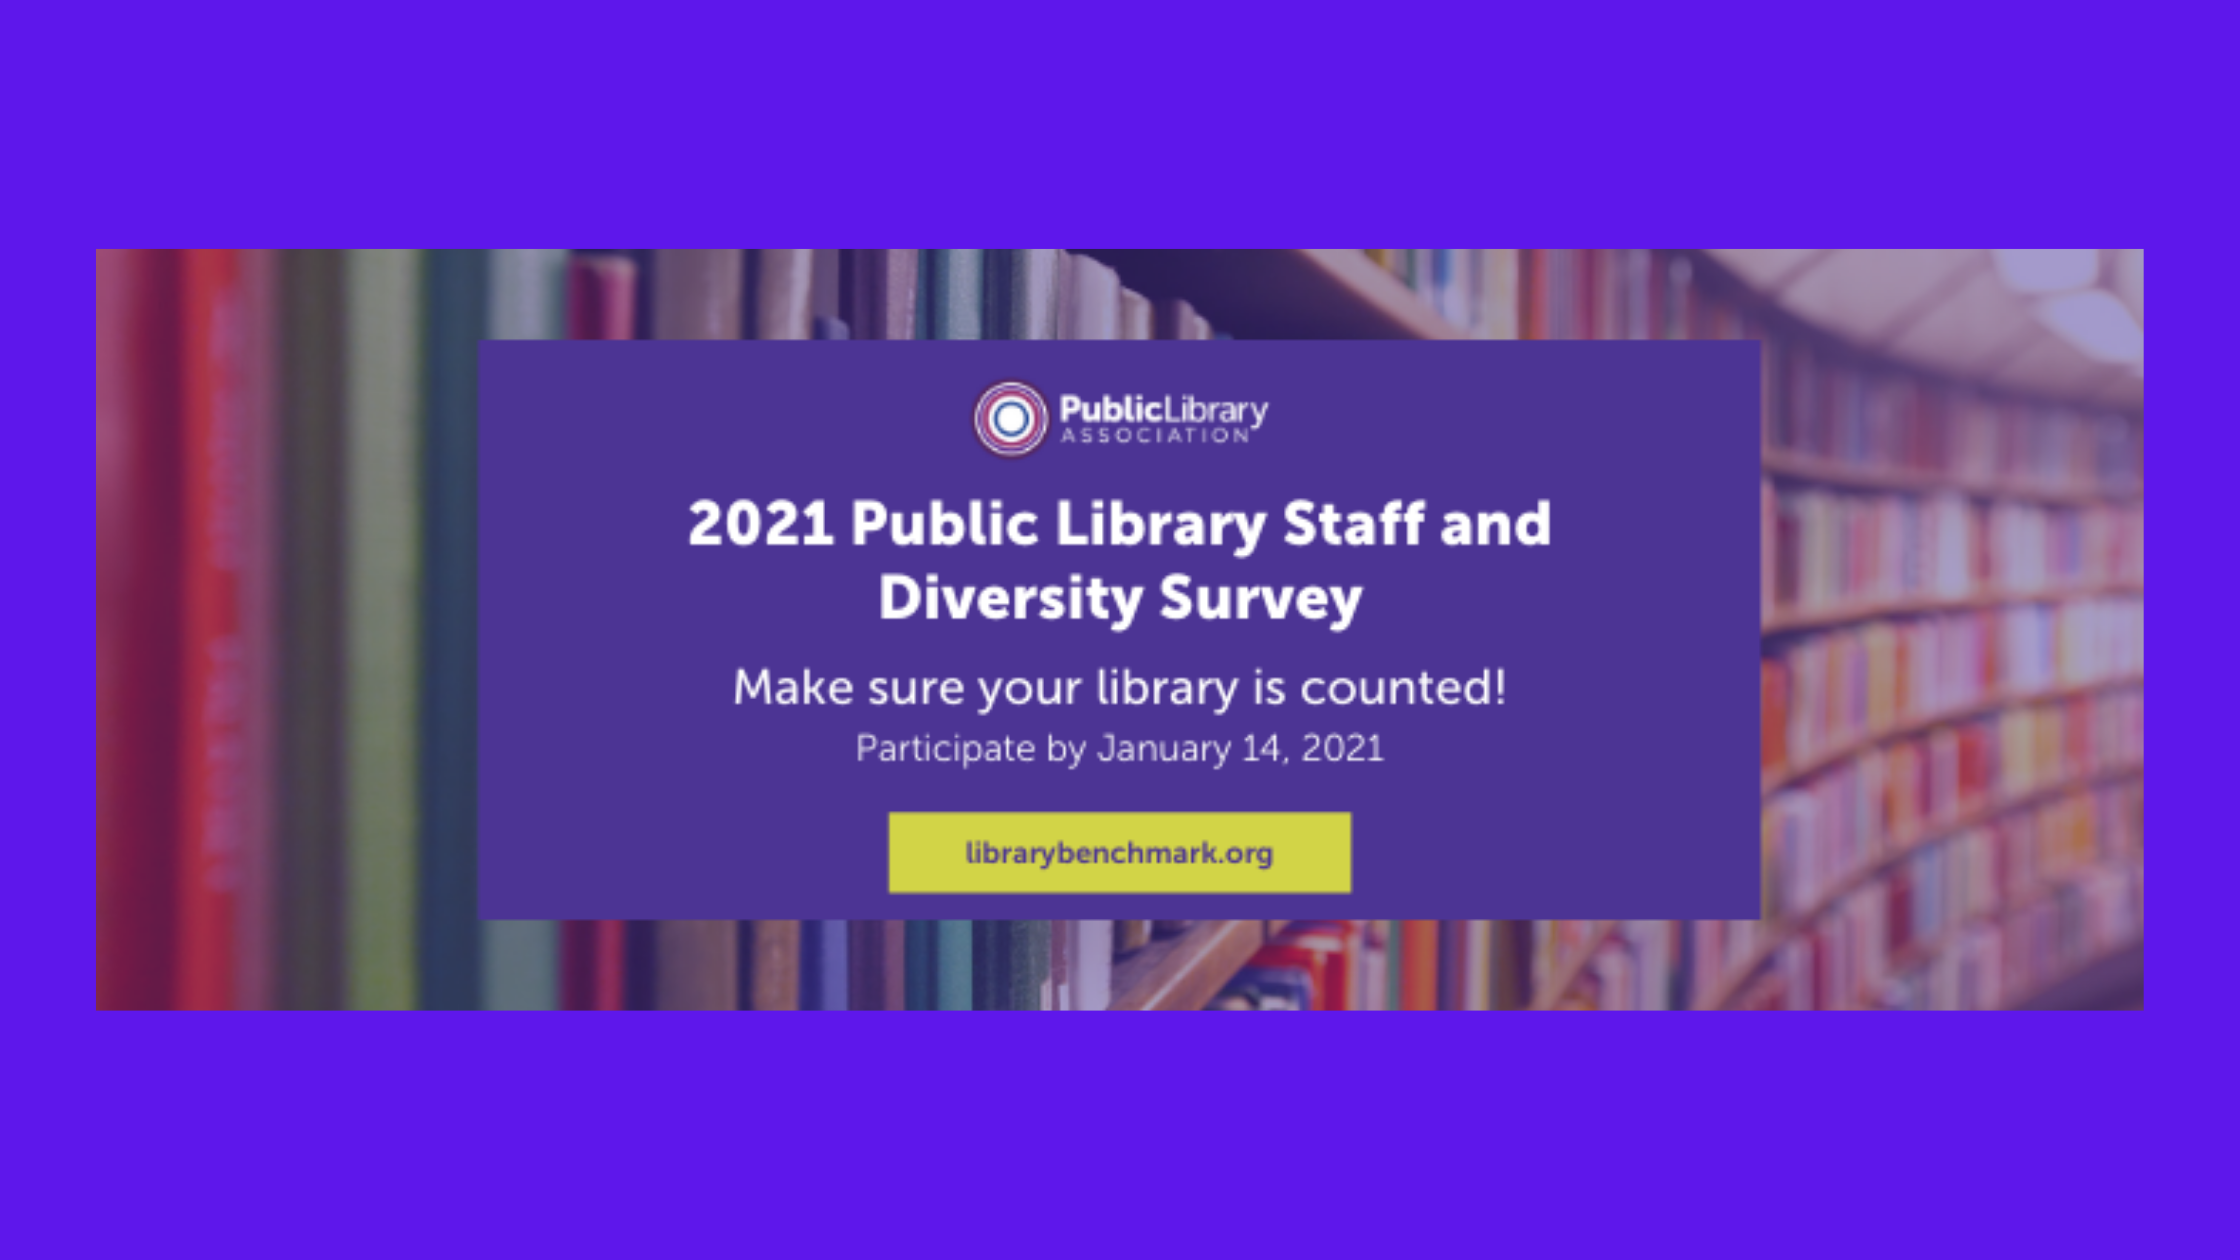 2021 Public Library staff and diversit survey header imposed over a bookshelf